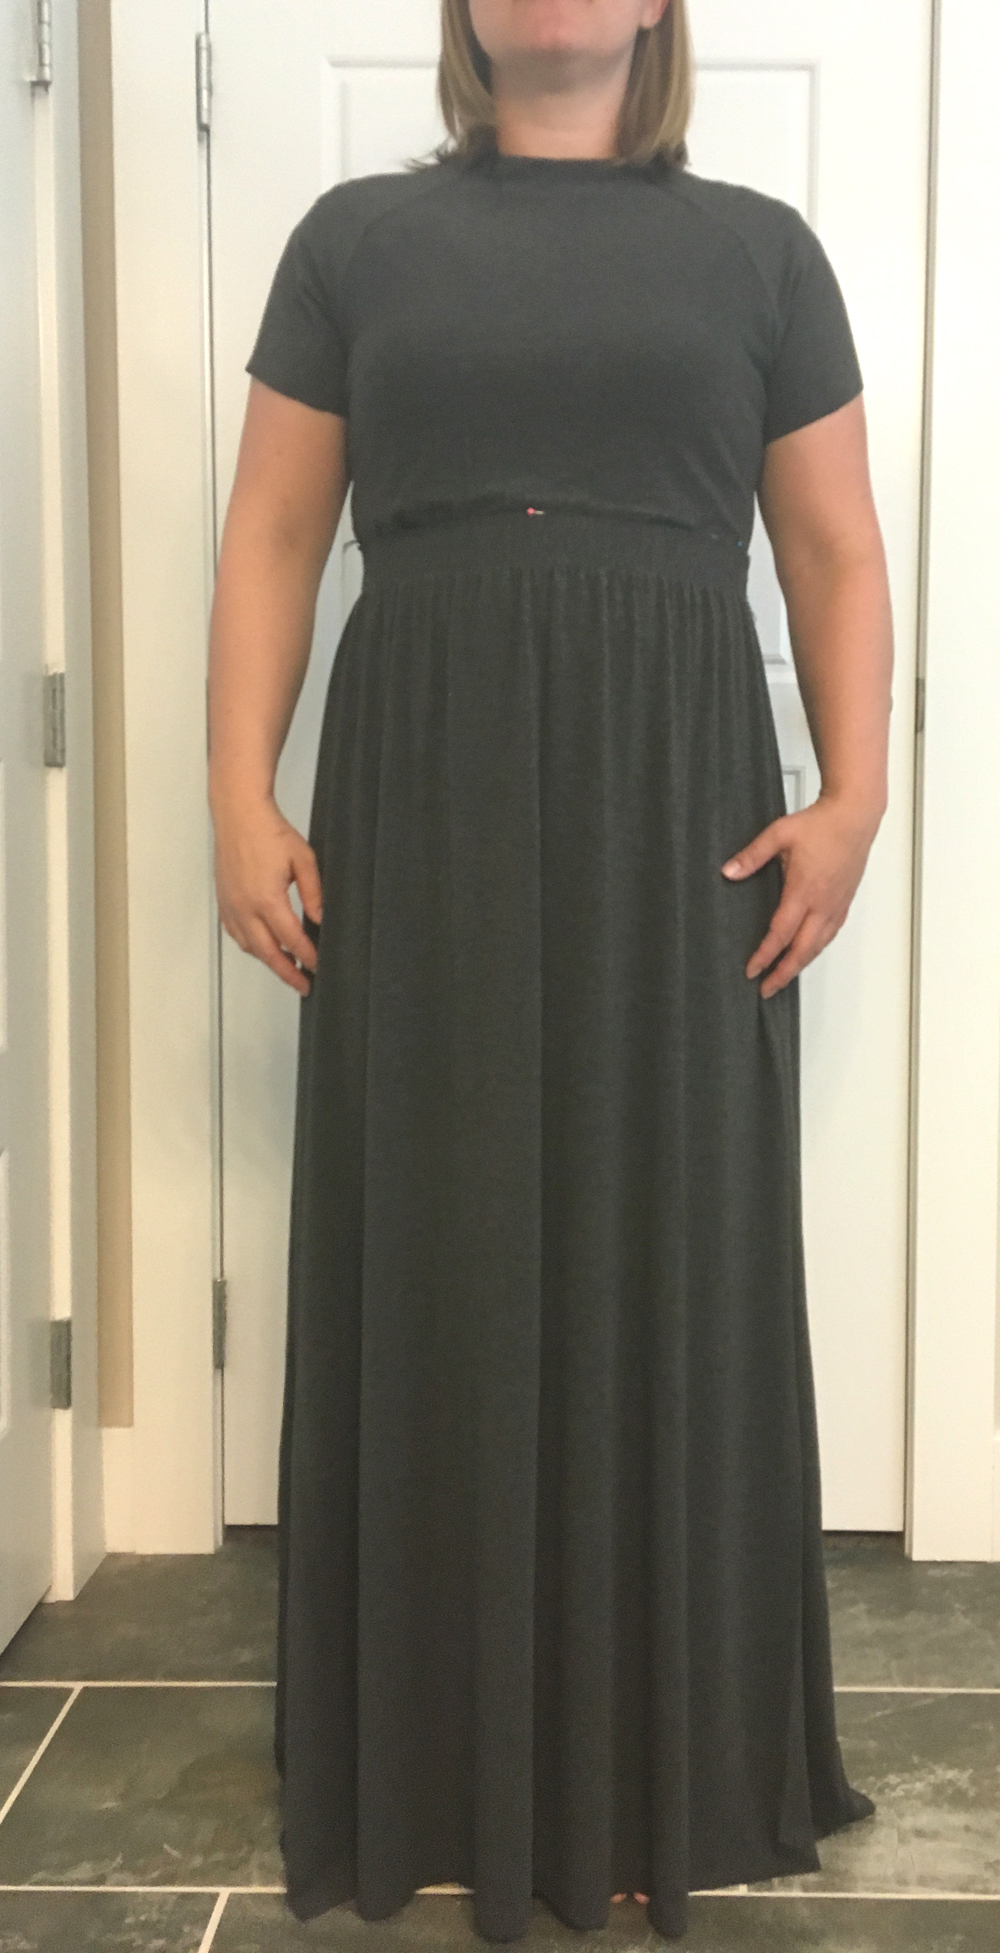 Woman wearing a maxi dress, marking where the waistband should be